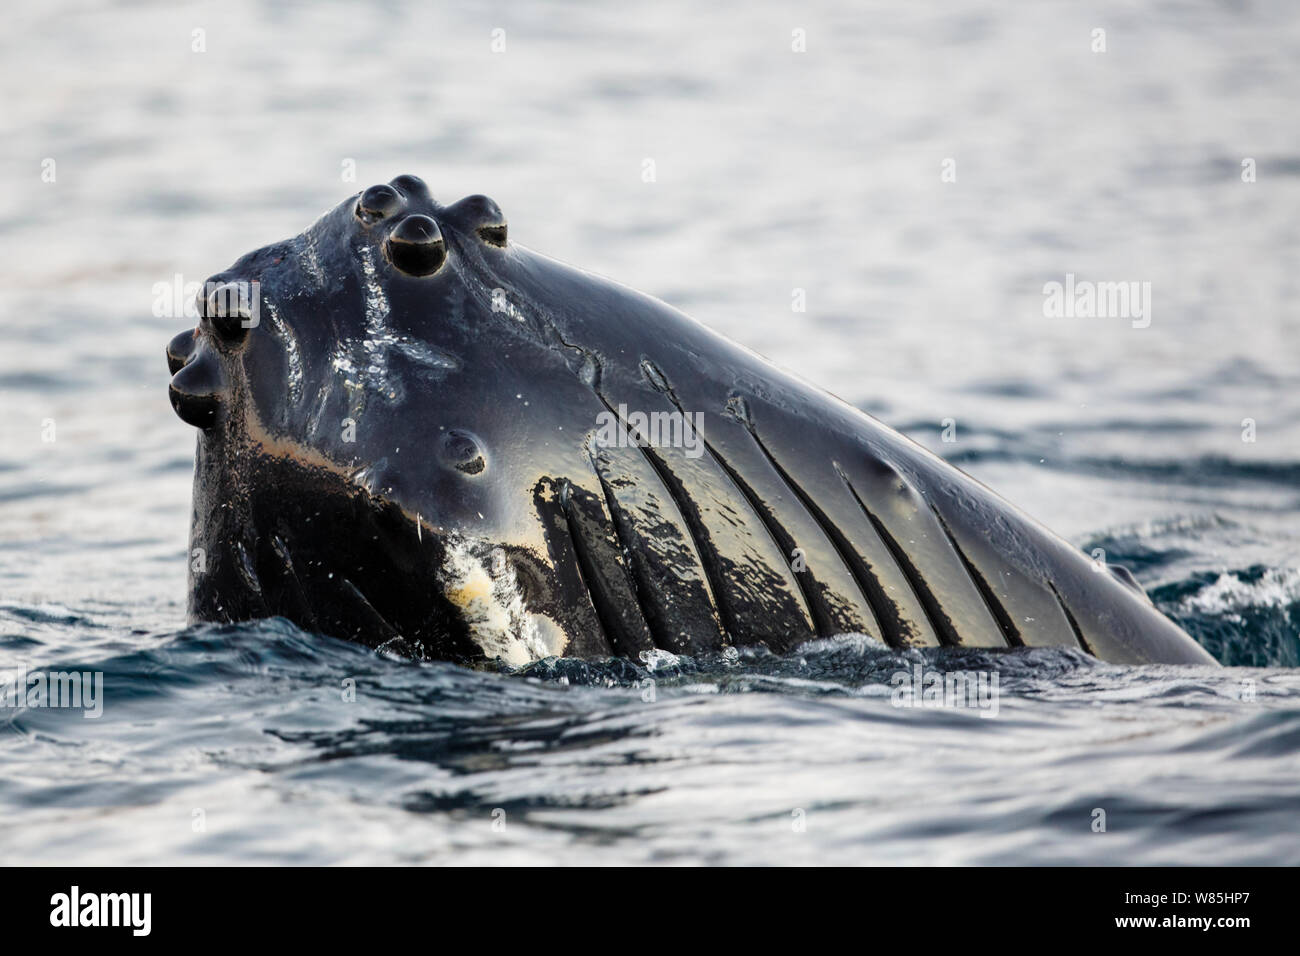 Close-up of a spyhopping Humpback whale (Megaptera novaeangliae) showing the knobs (tubercles) which are enlarged hair follicles possibly used for sensory purposes. Kvaloya, Troms, Northern Norway. November. Stock Photo